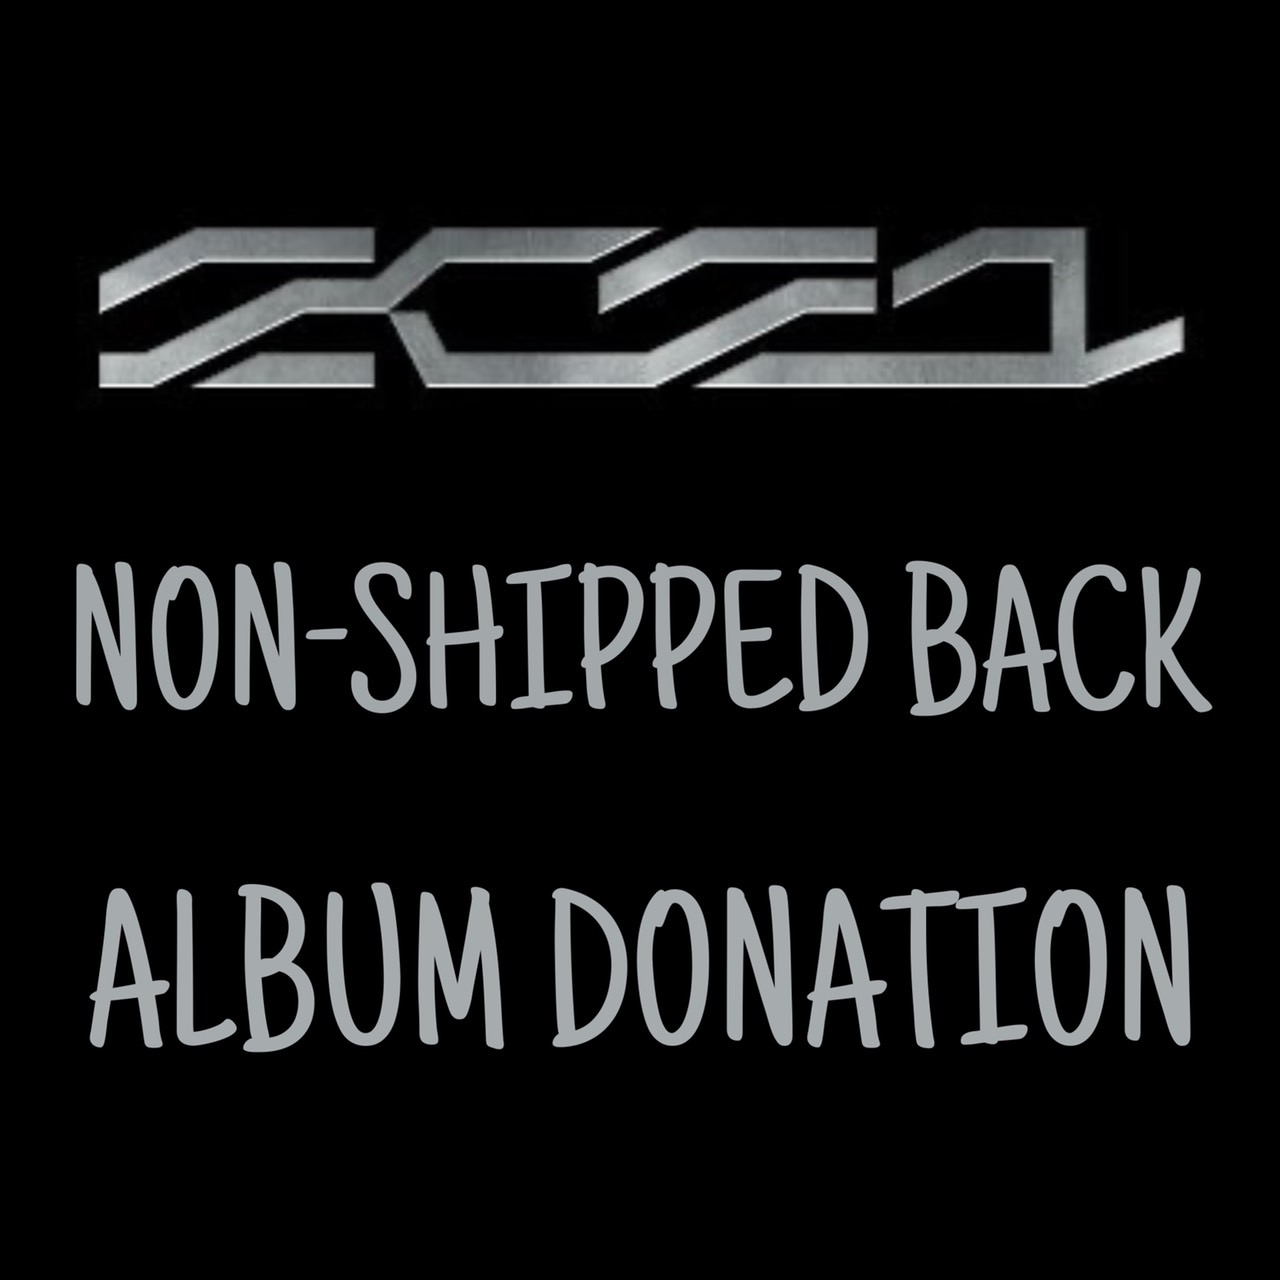 [Donation] Nonshipped back album donation for next JUNGWOO COMEBACK @zeenblue